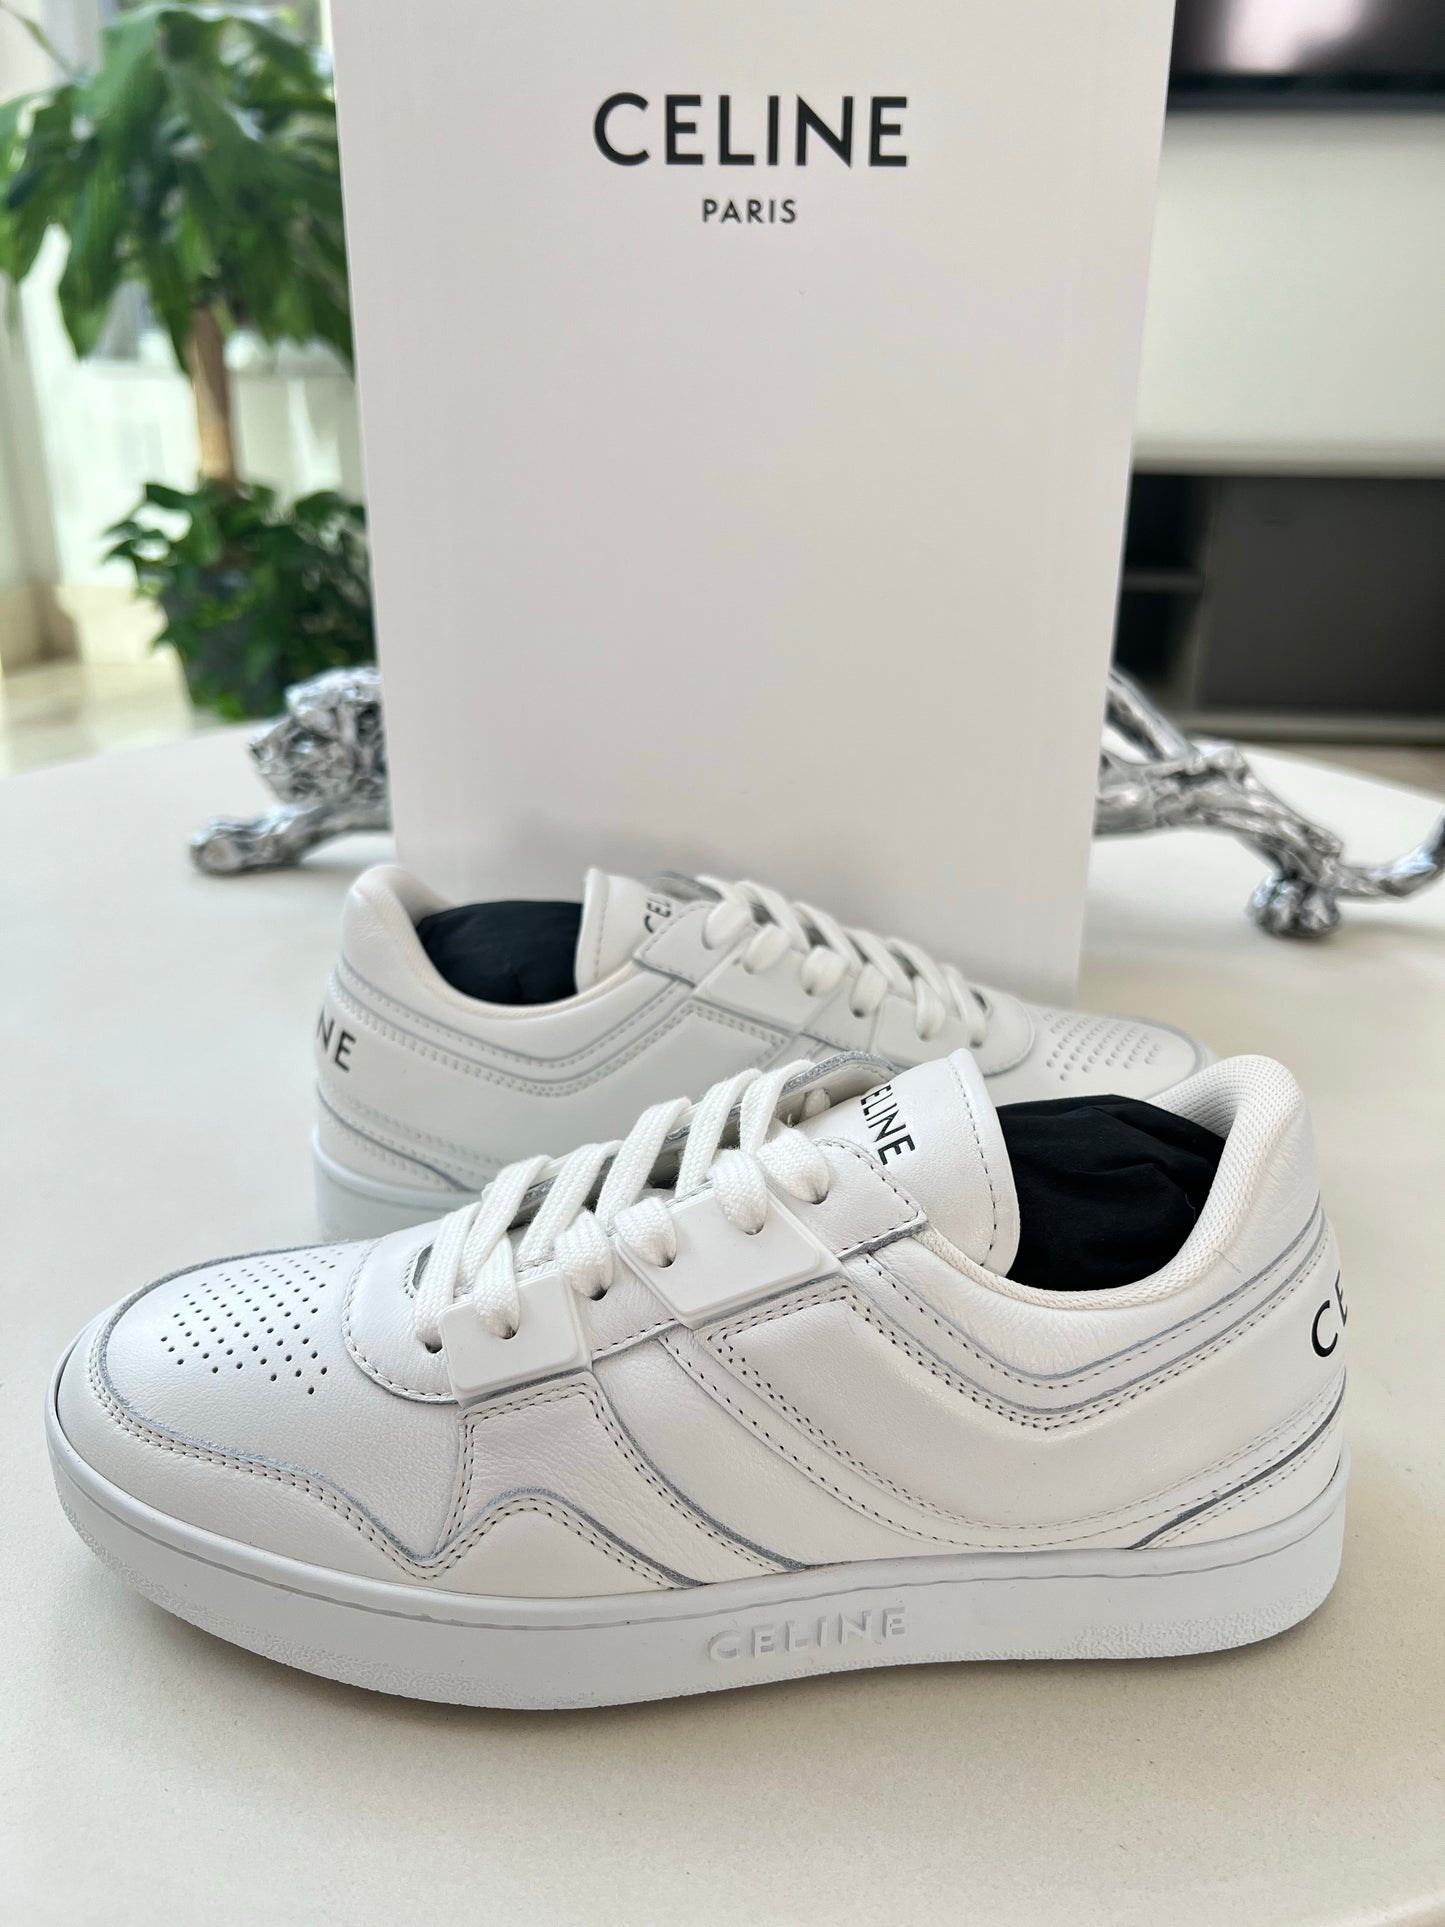 CT-04 CELINE TRAINER LOW LACE-UP SNEAKER IN CALFSKIN - OPTIC WHITE